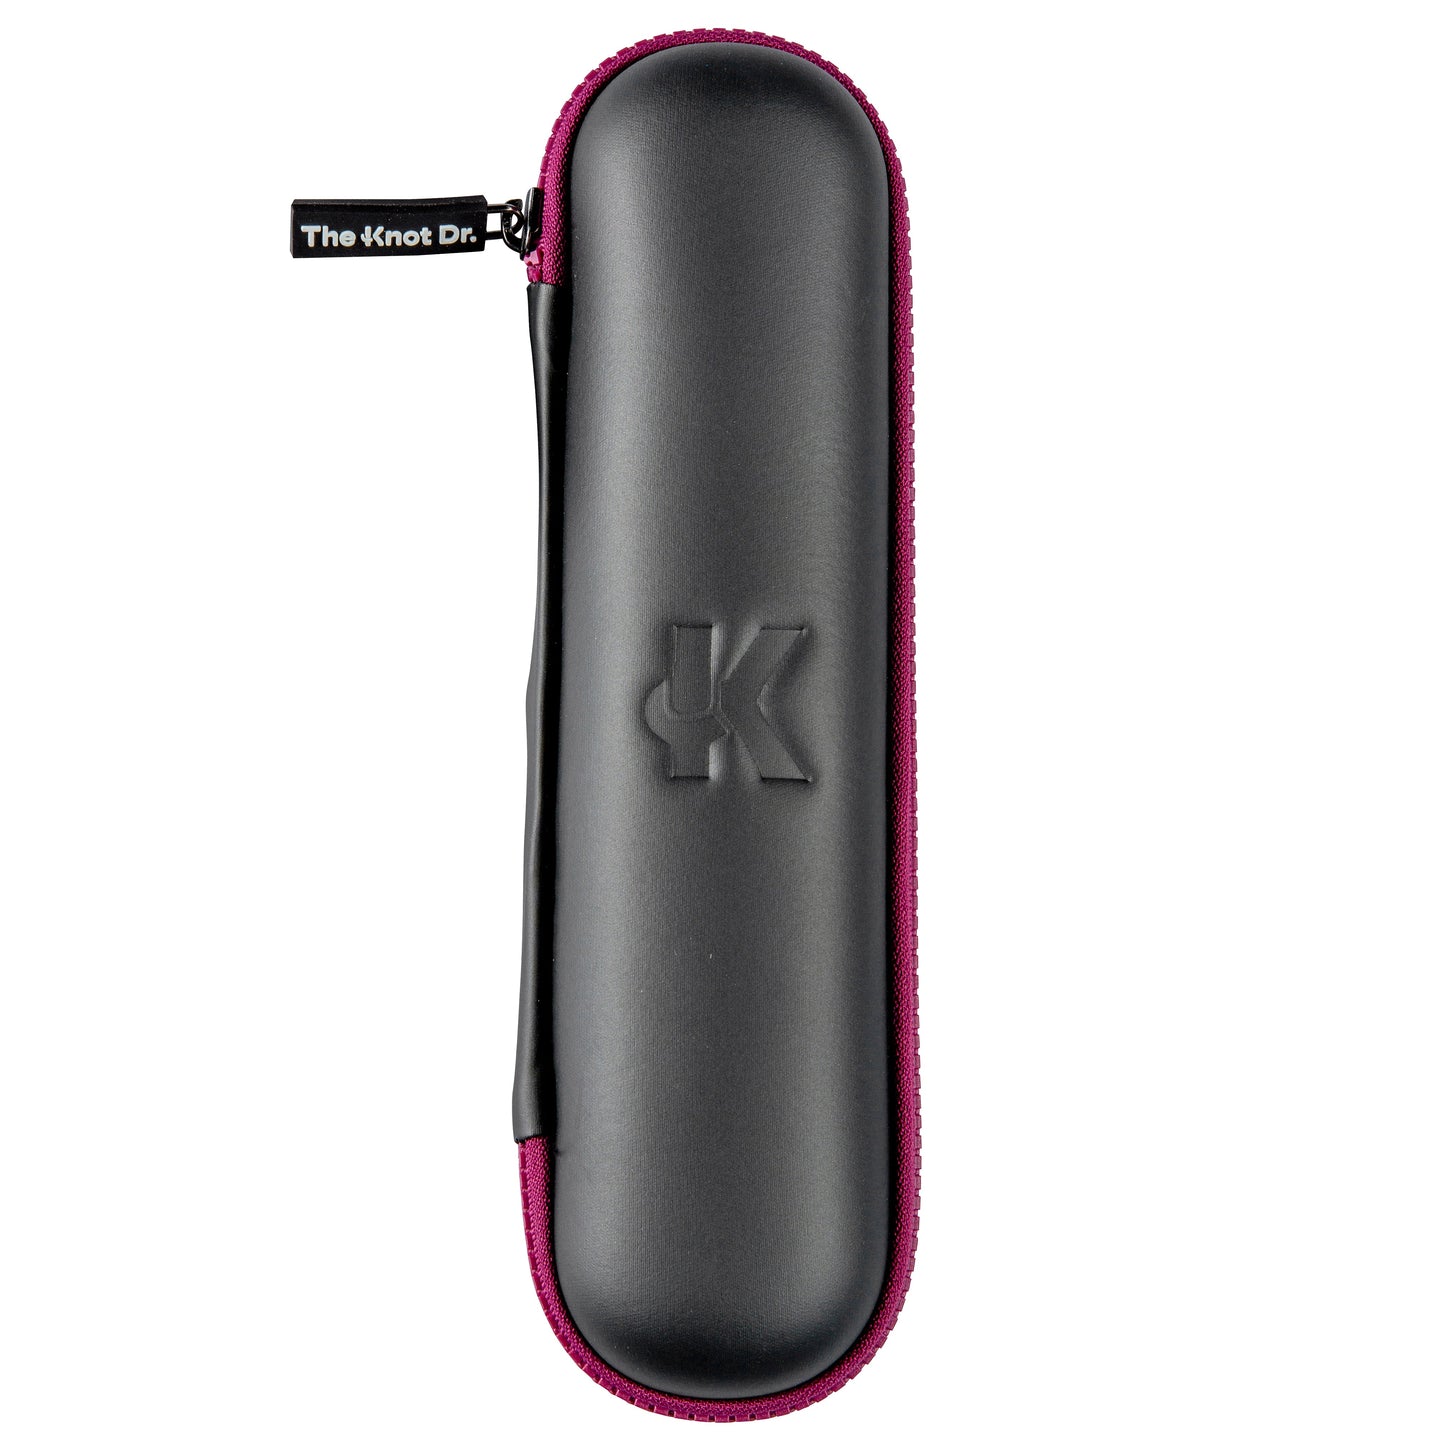 Black and pink hairbrush protector case